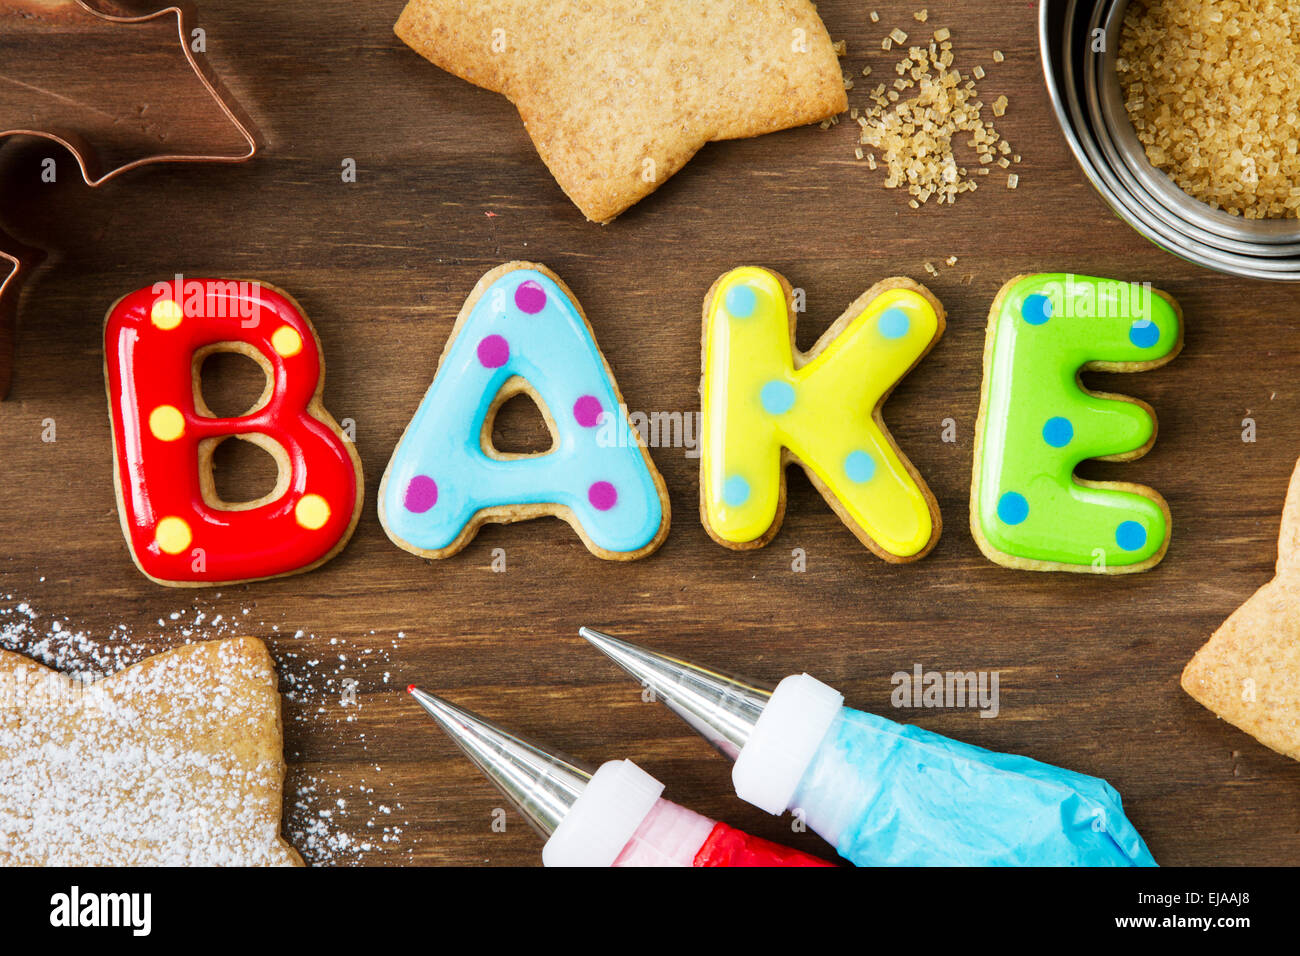 Cookies forming the word bake Stock Photo